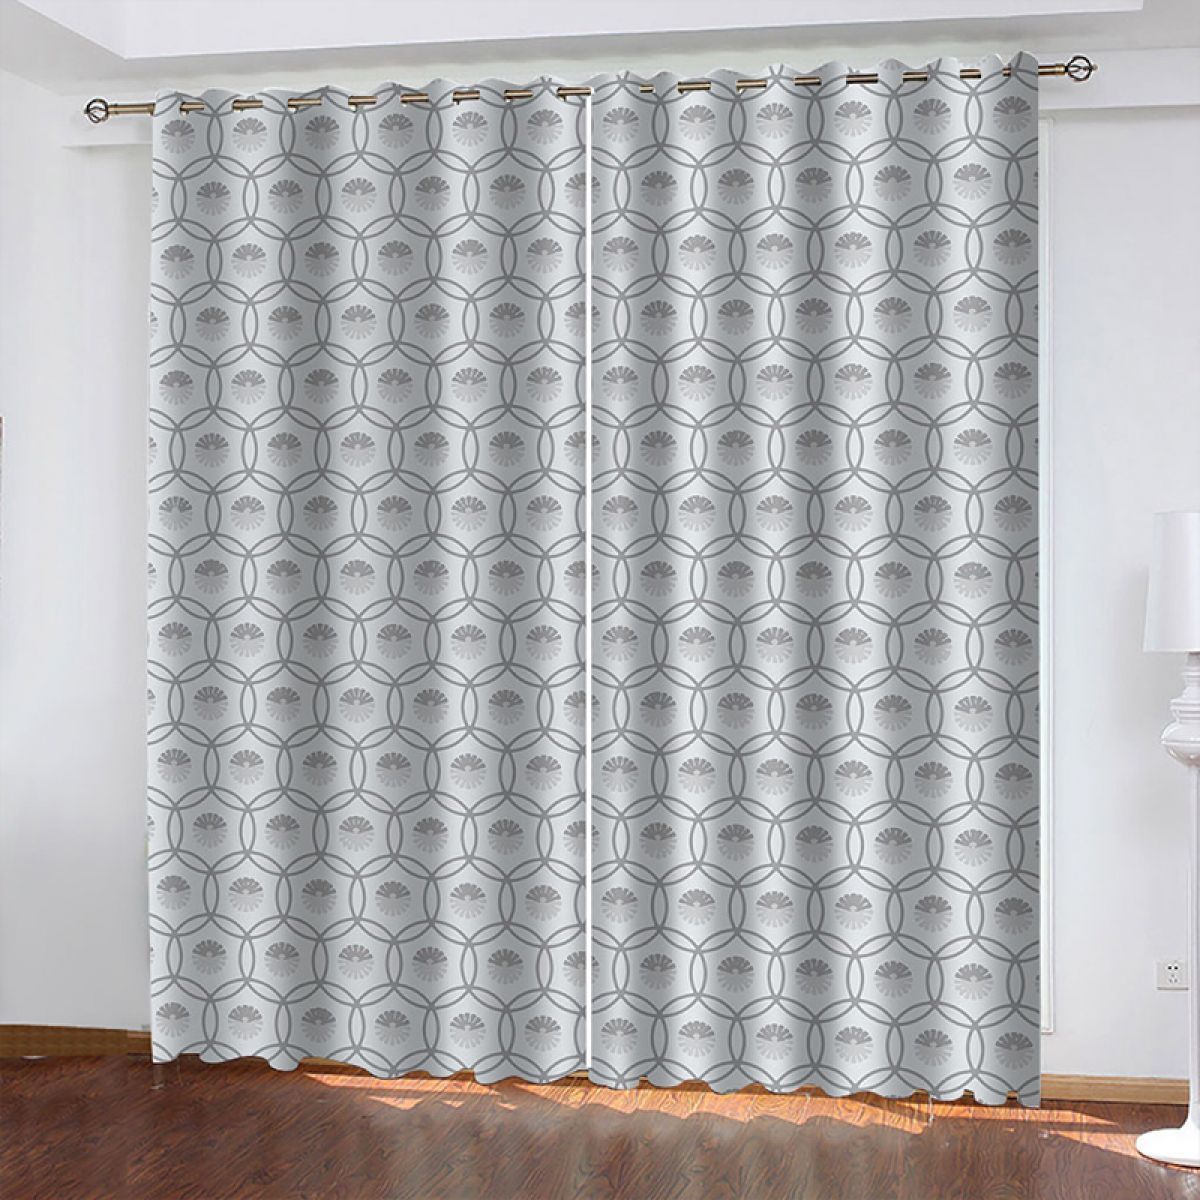 3d Intersecting Circles Printed Window Curtain Home Decor